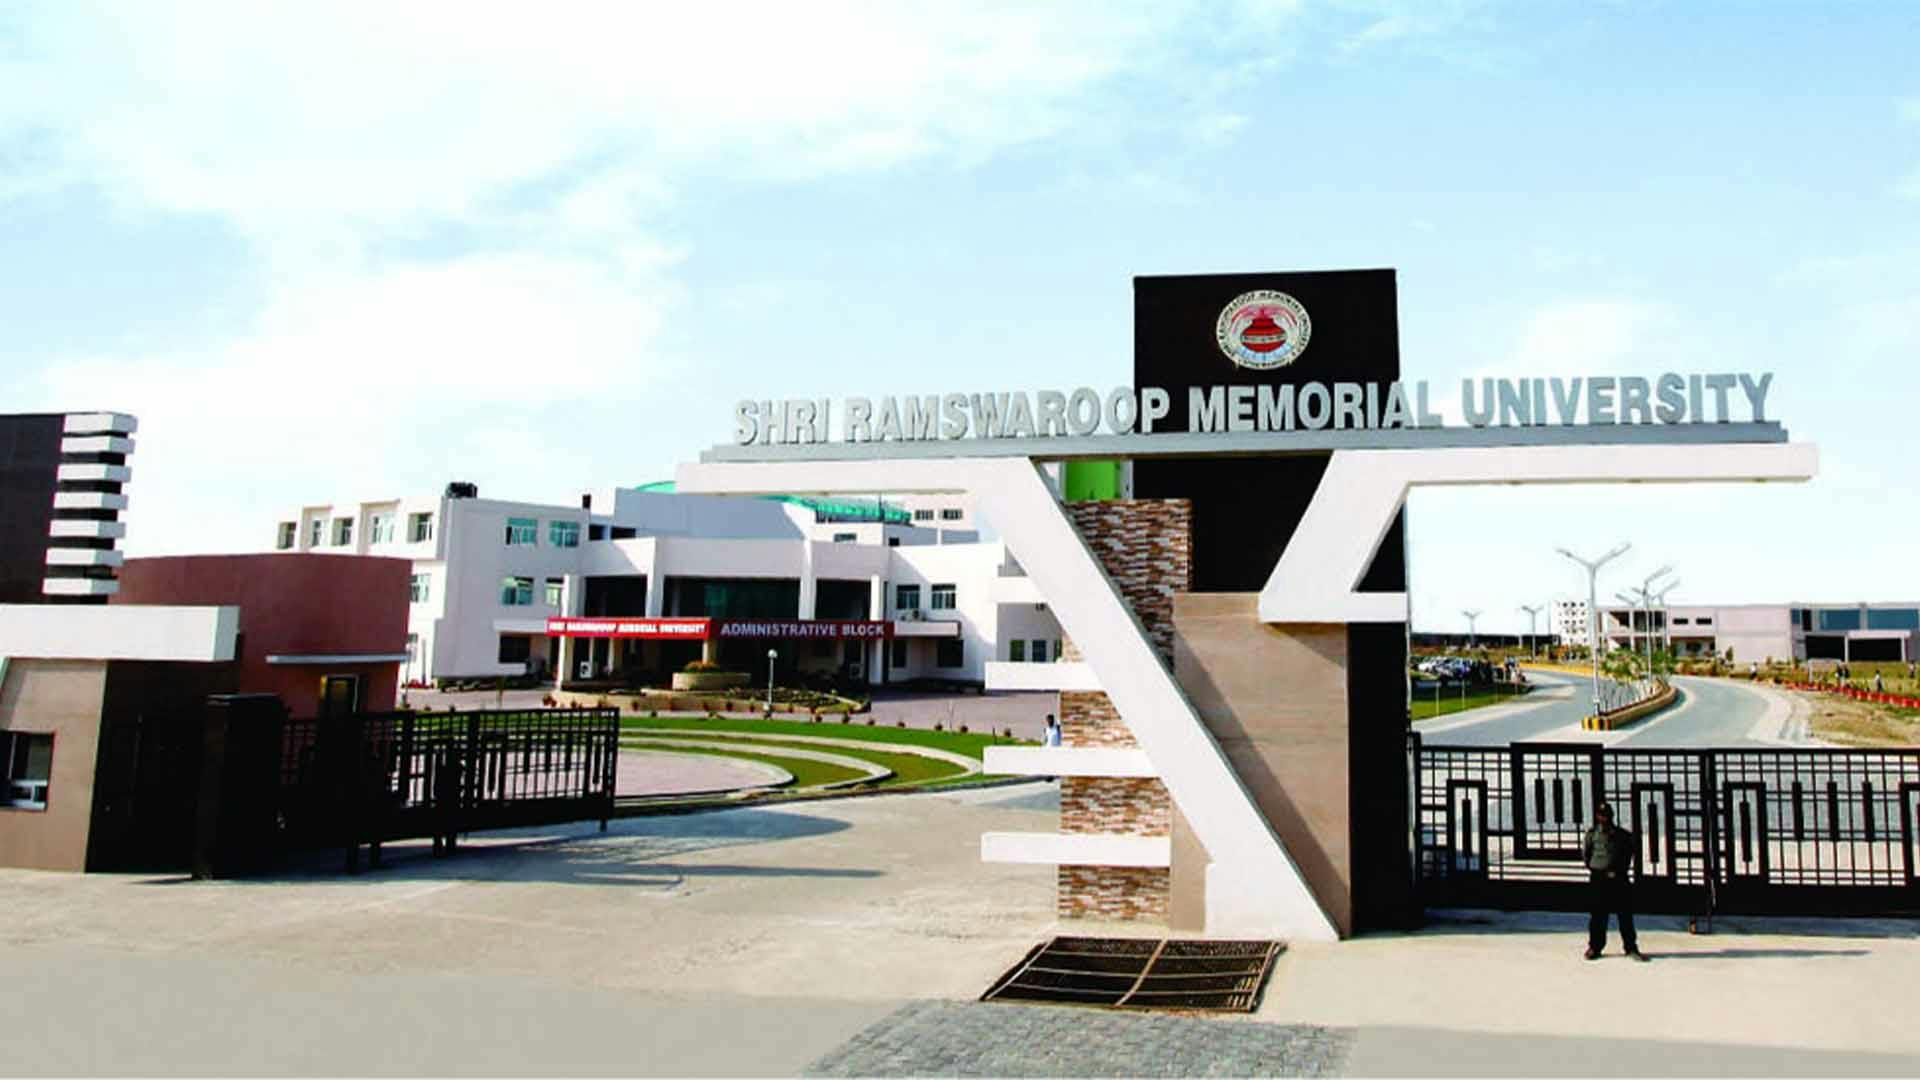 Shri Ramswaroop Memorial University, Lucknow - one of the top MBA colleges in India